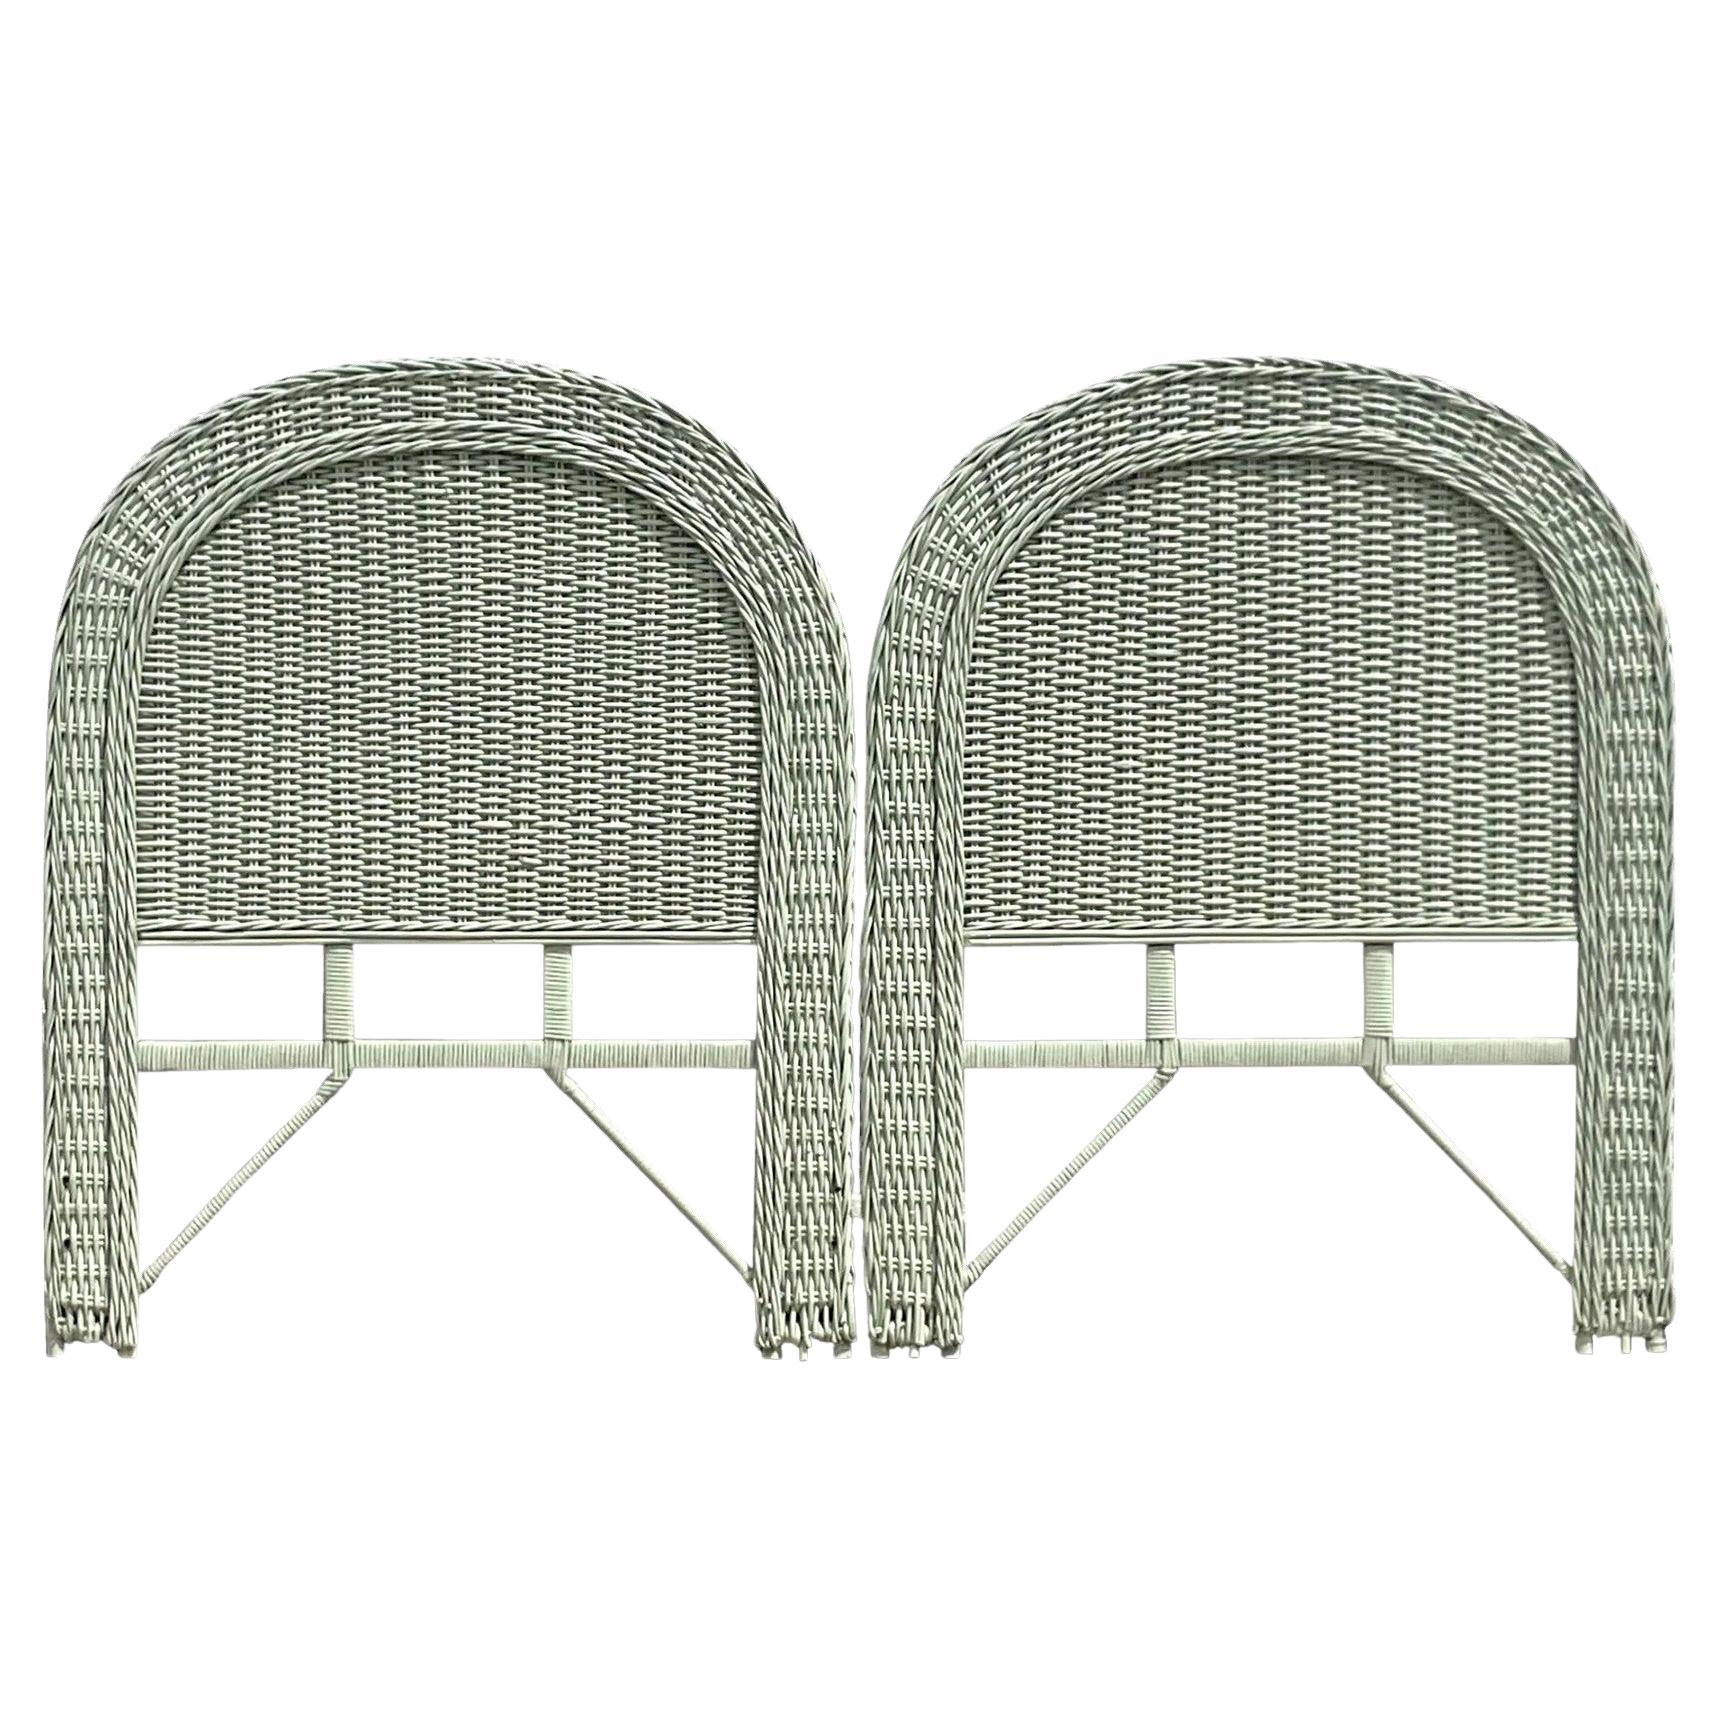 Late 20th Century Vintage Coastal Celedon Woven Rattan Twin Headboards - A Pair For Sale